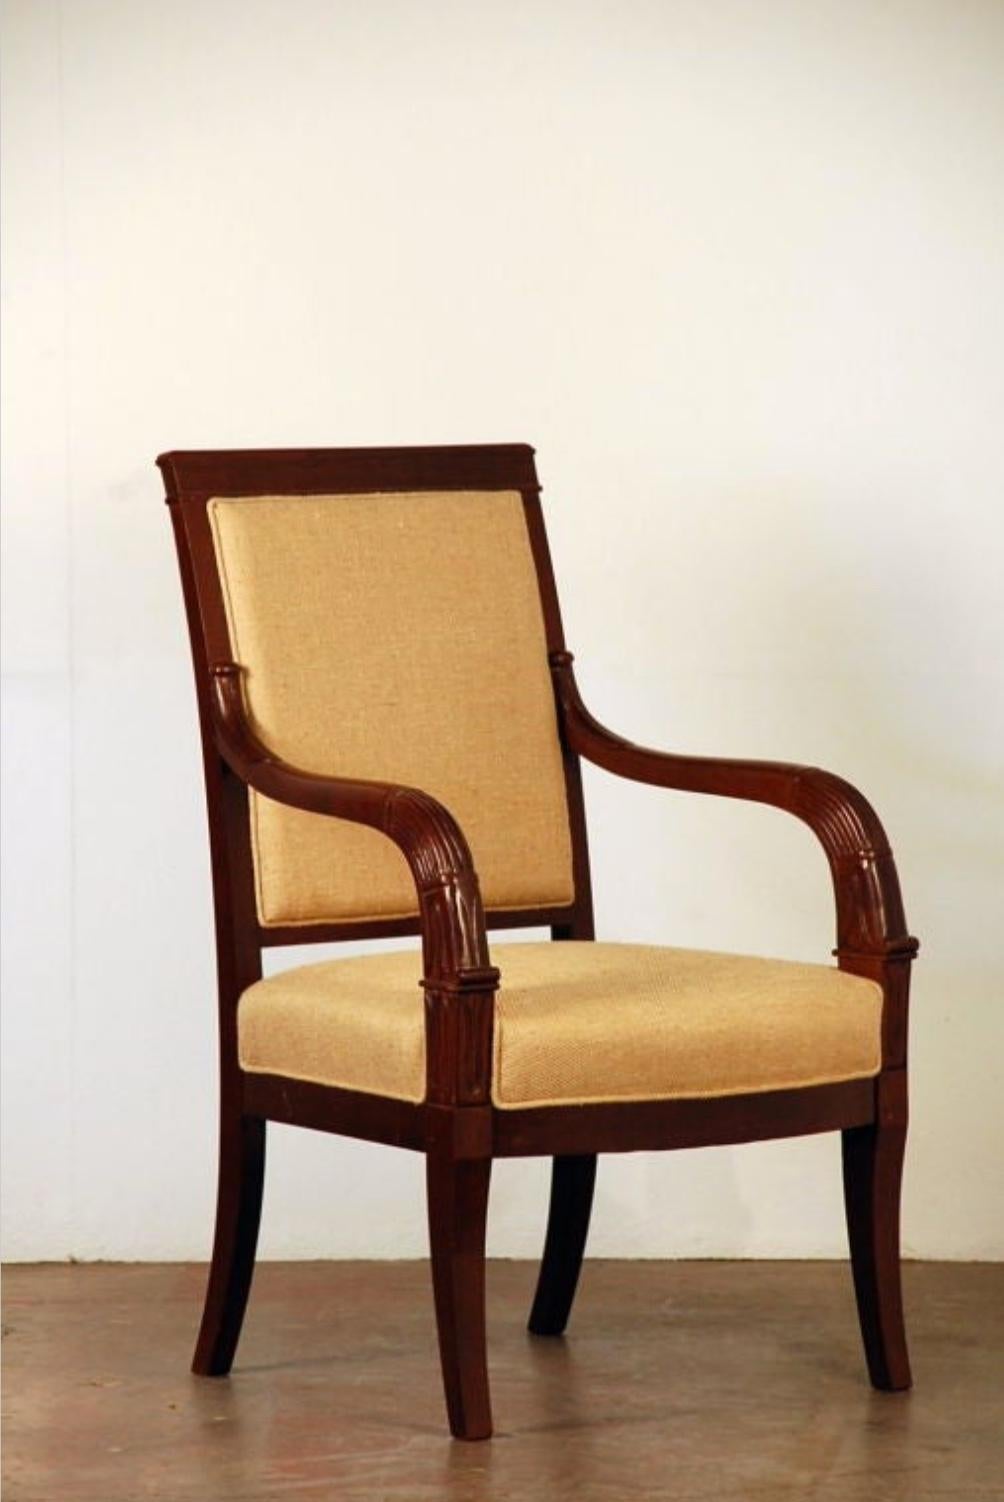 Pair of Chic French Empire Style Mahogany Armchairs For Sale 2